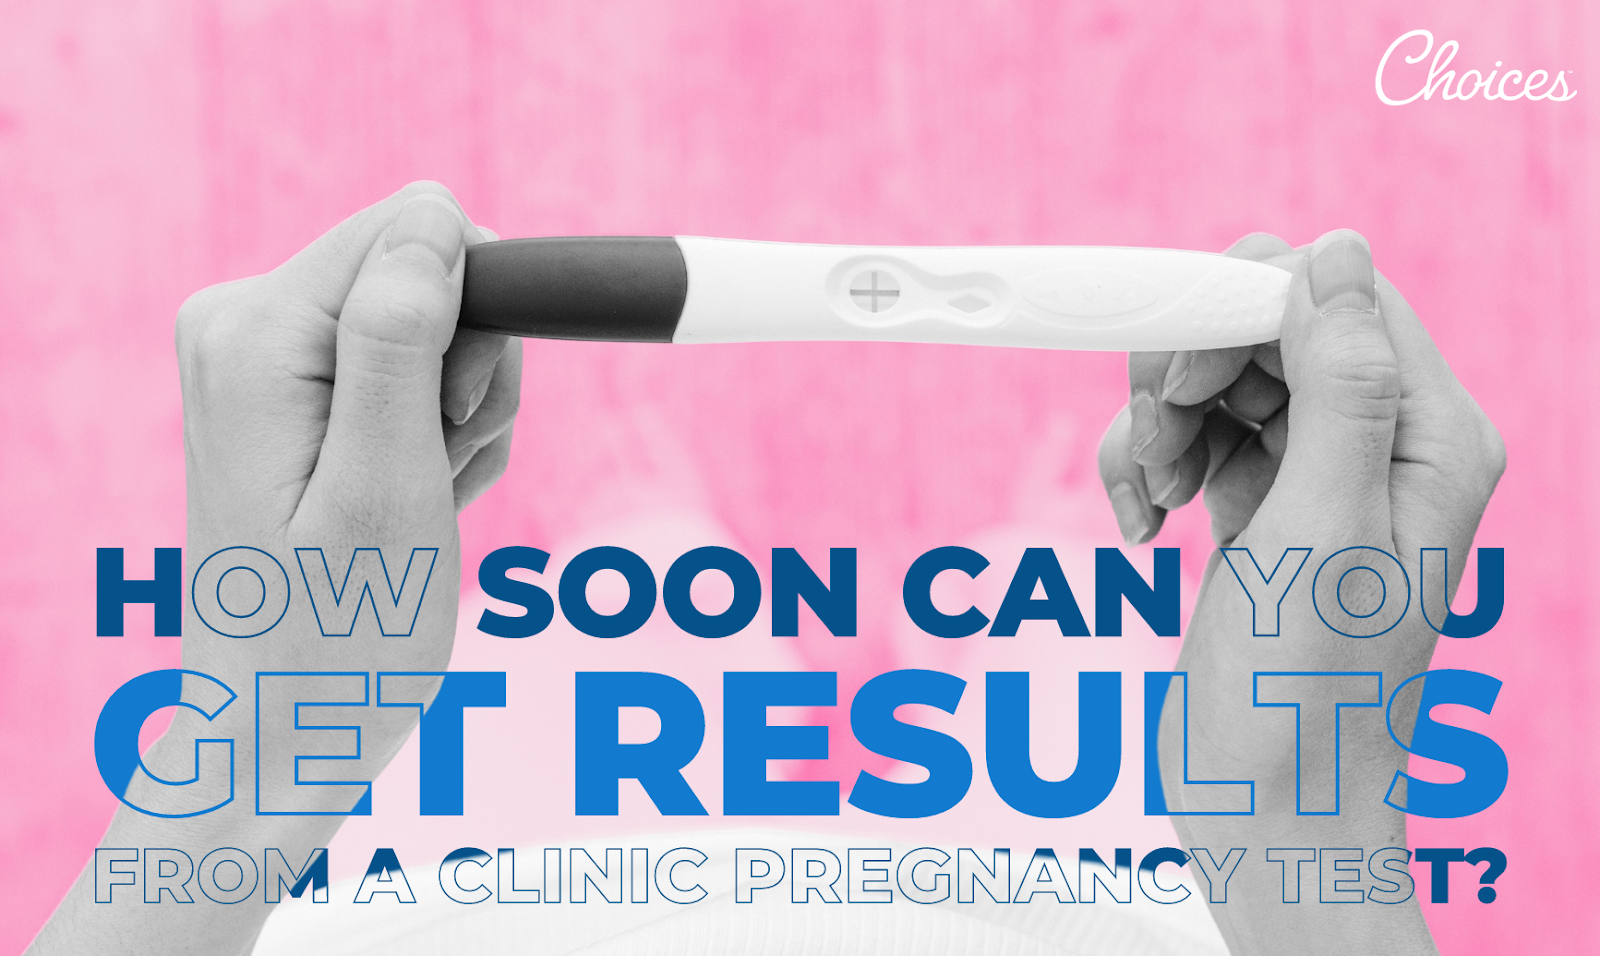 How Soon Can you Get Results from a Clinic Pregnancy Test?